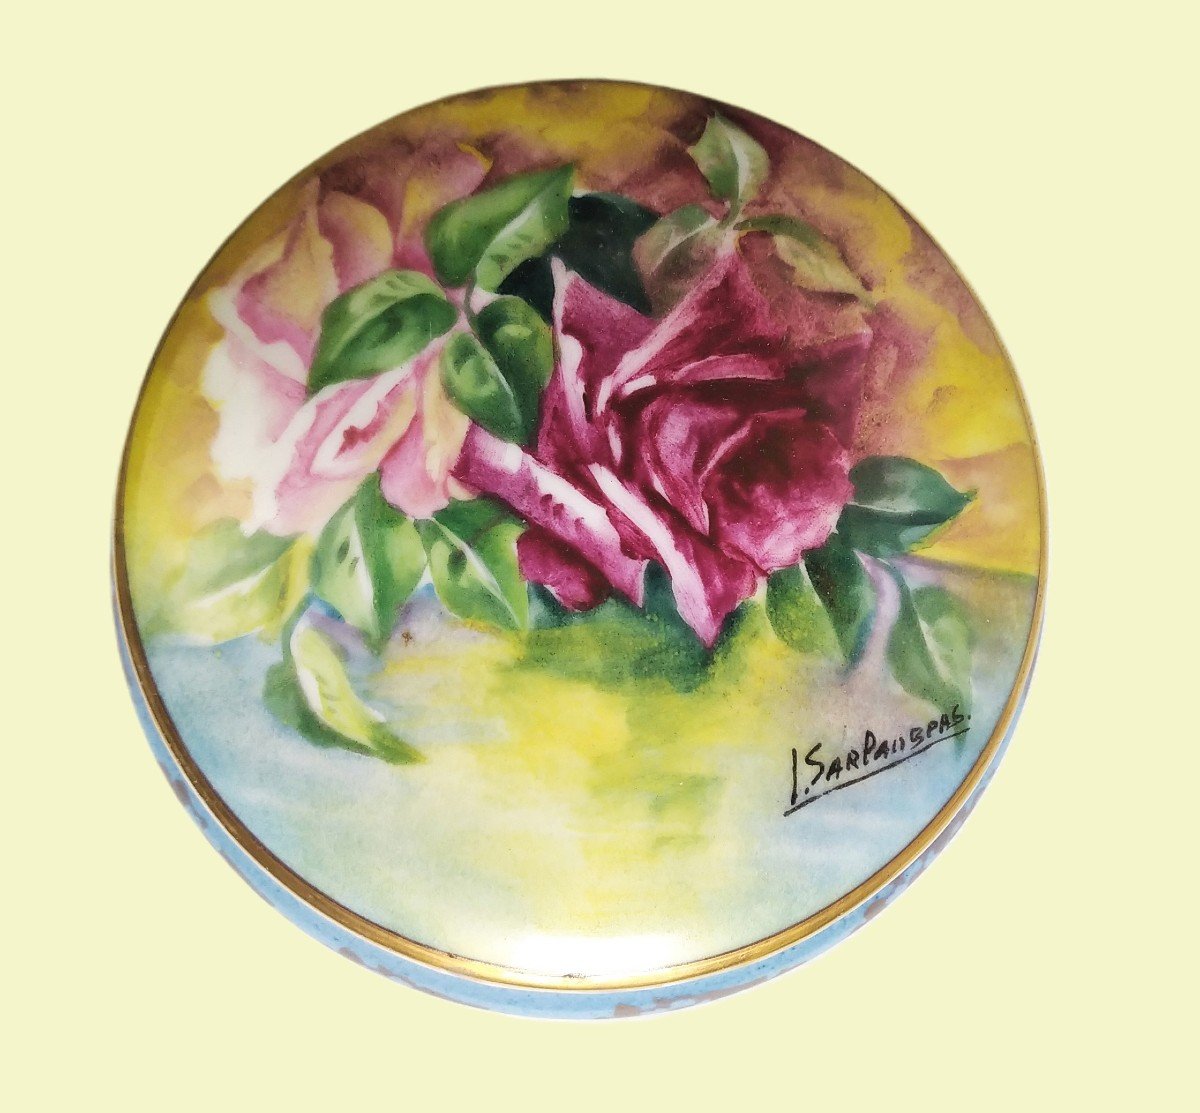 Jewelry Or Candy Box Hand Painted Limoges Porcelain Decor Roses Signed By Artist Sarlangeas -photo-4